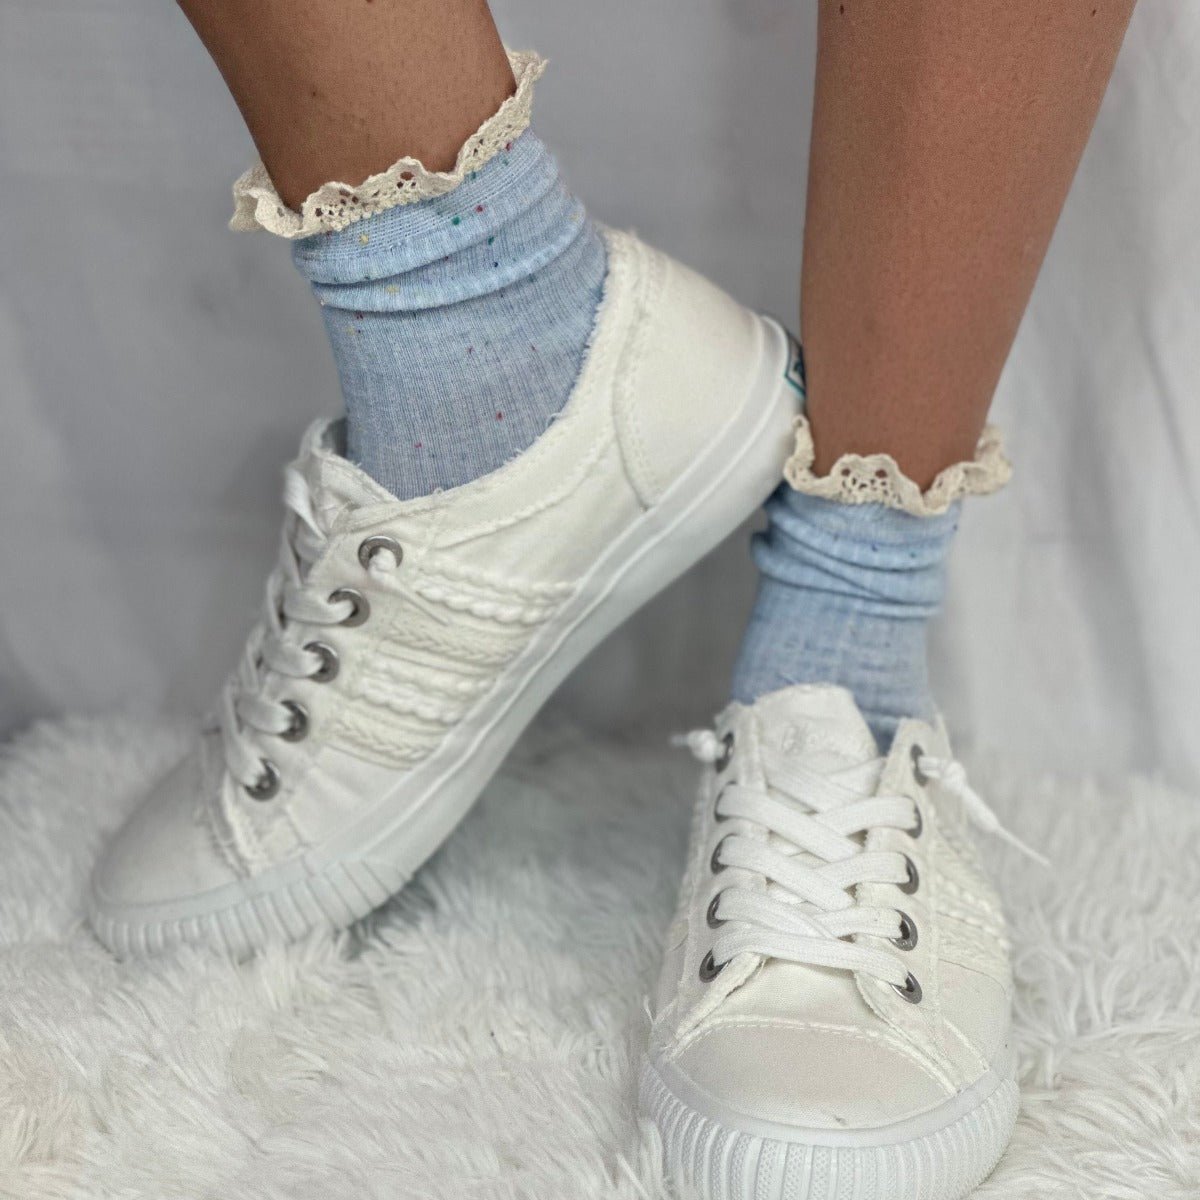 CONFETTI  lace topped ankle socks - blue